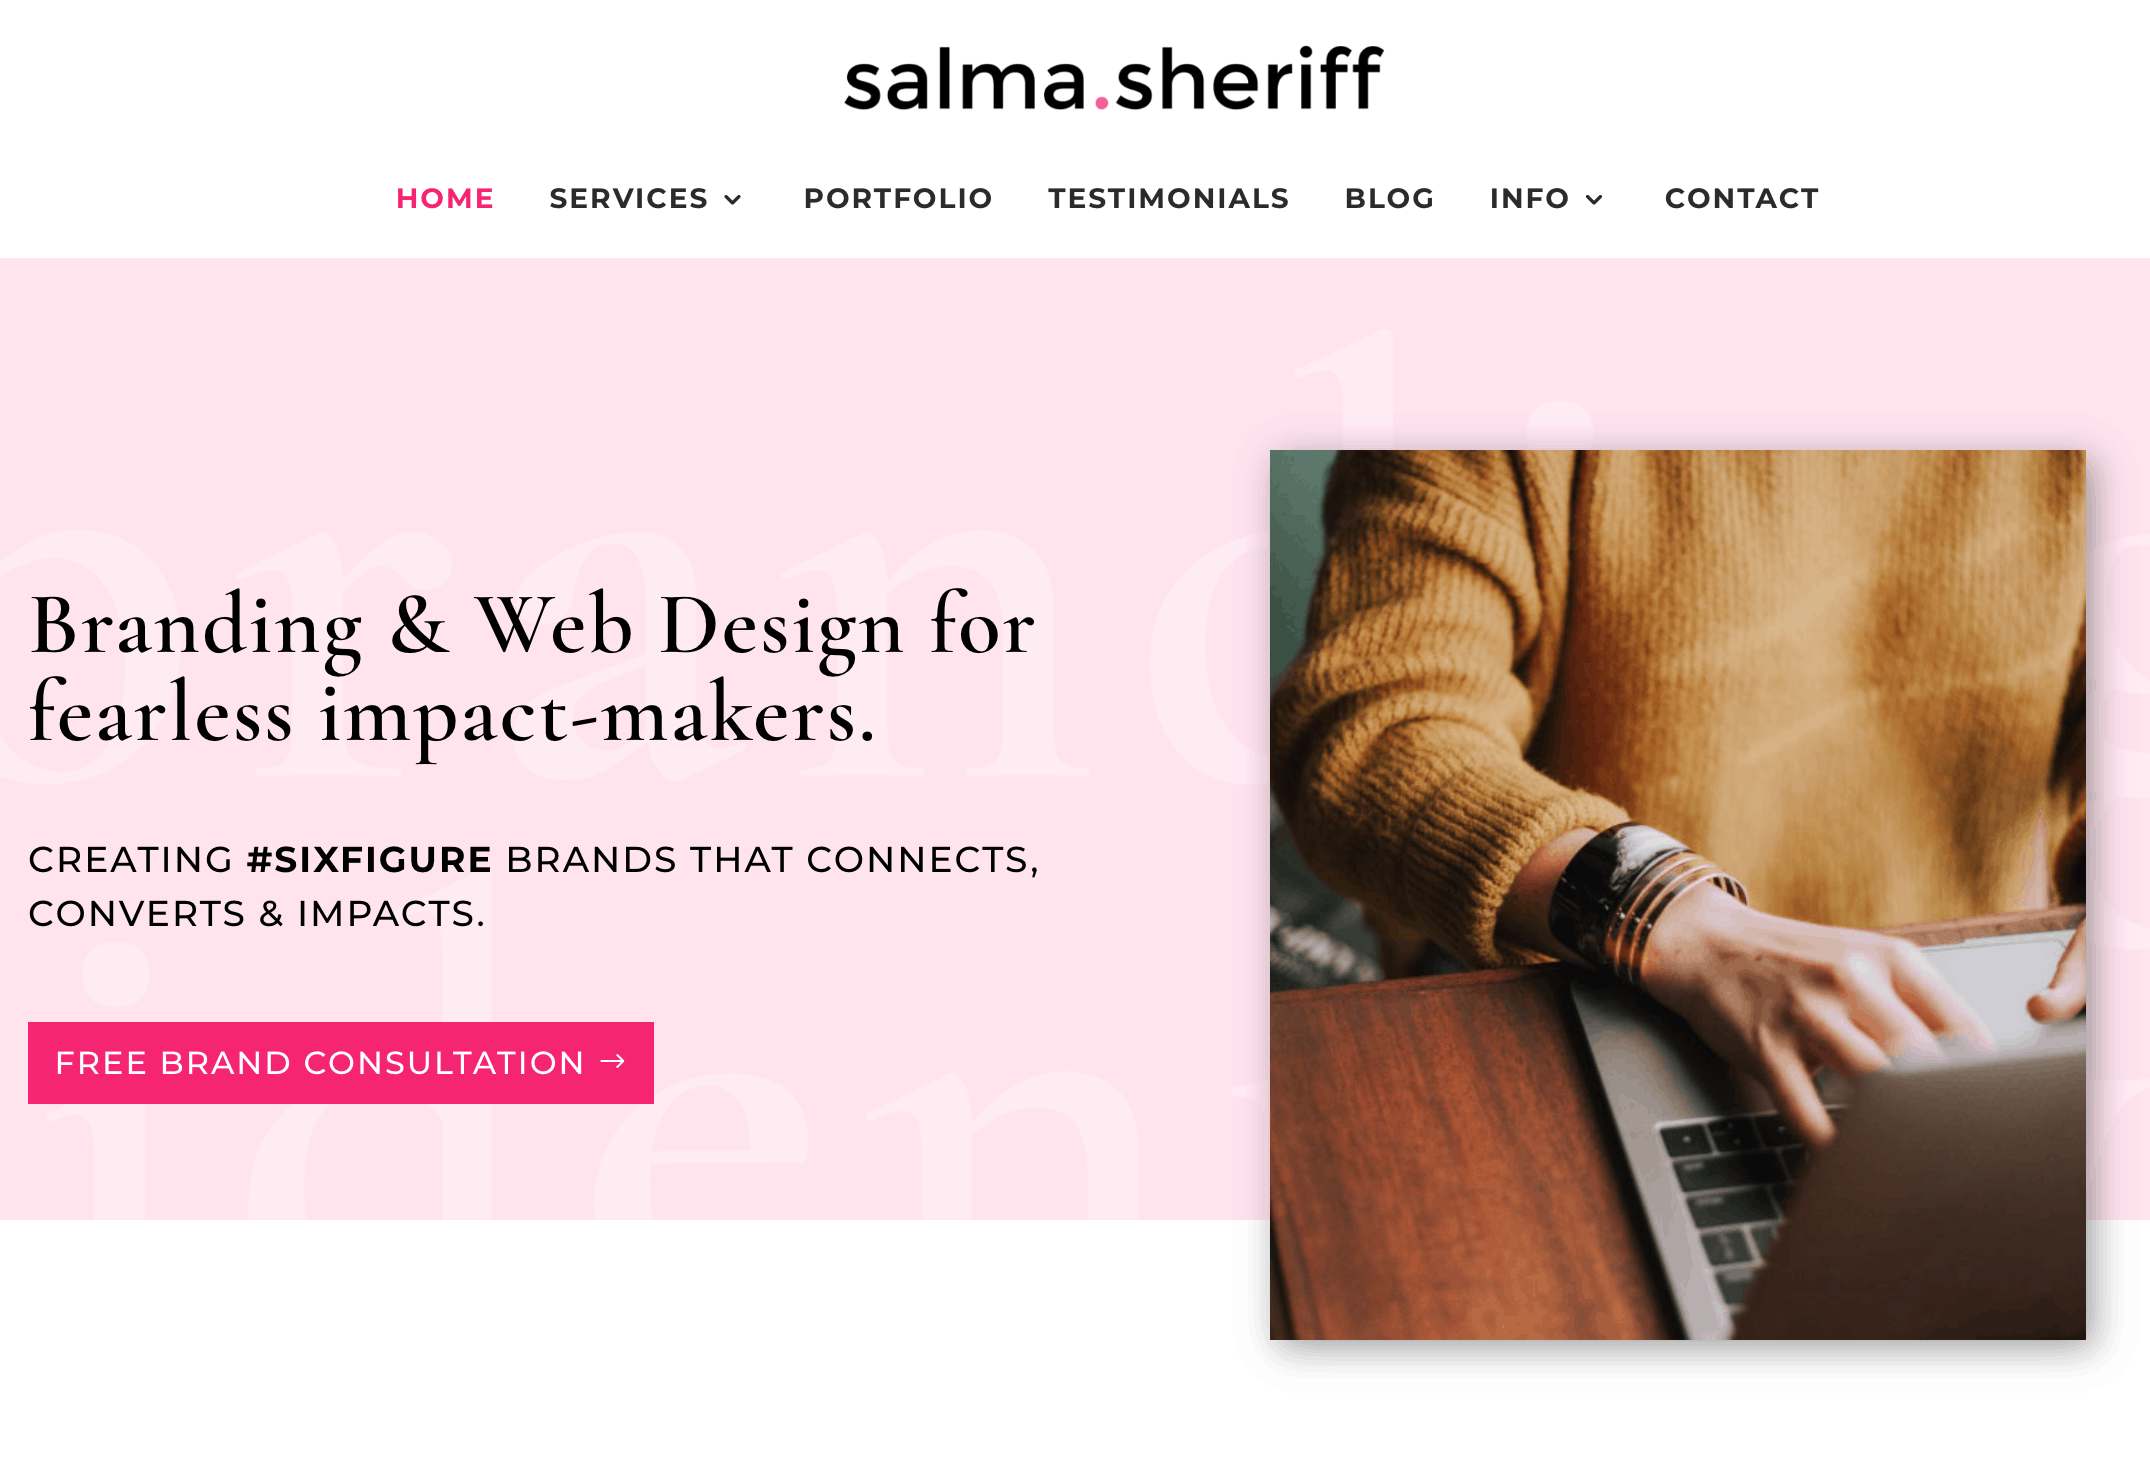 Salma uses her blog to gain clients